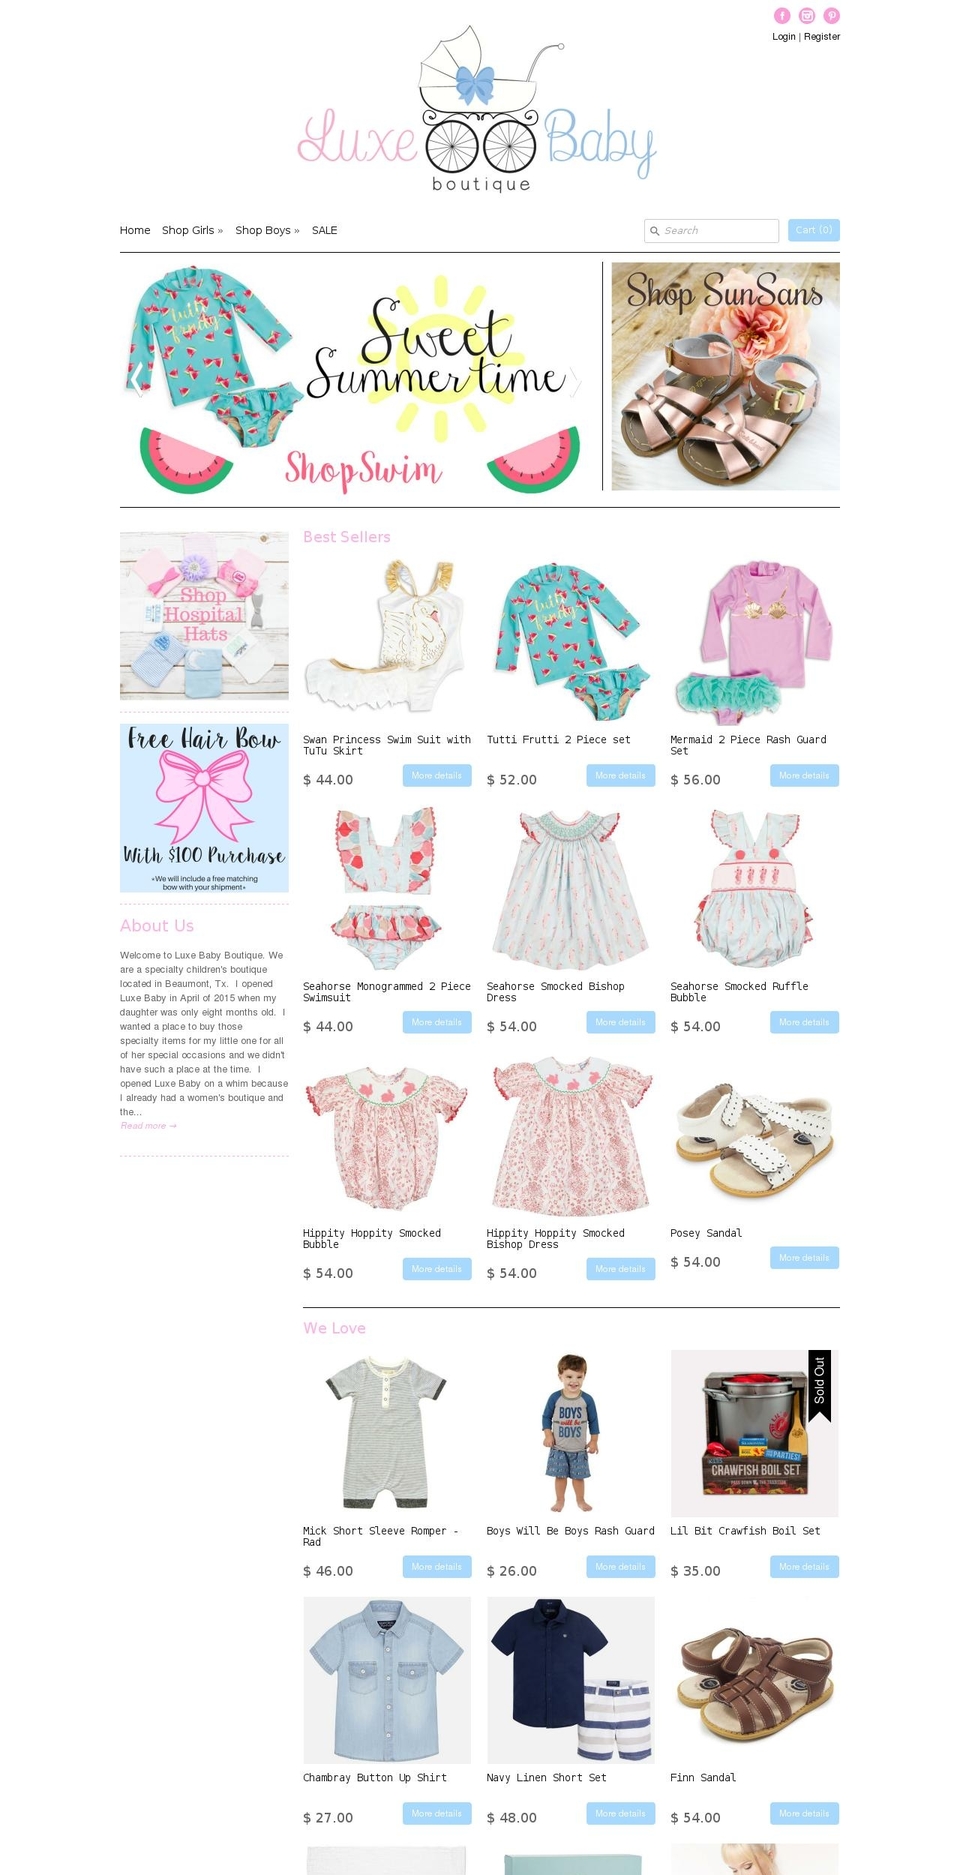 Editions Shopify theme site example shopluxebabyboutique.com